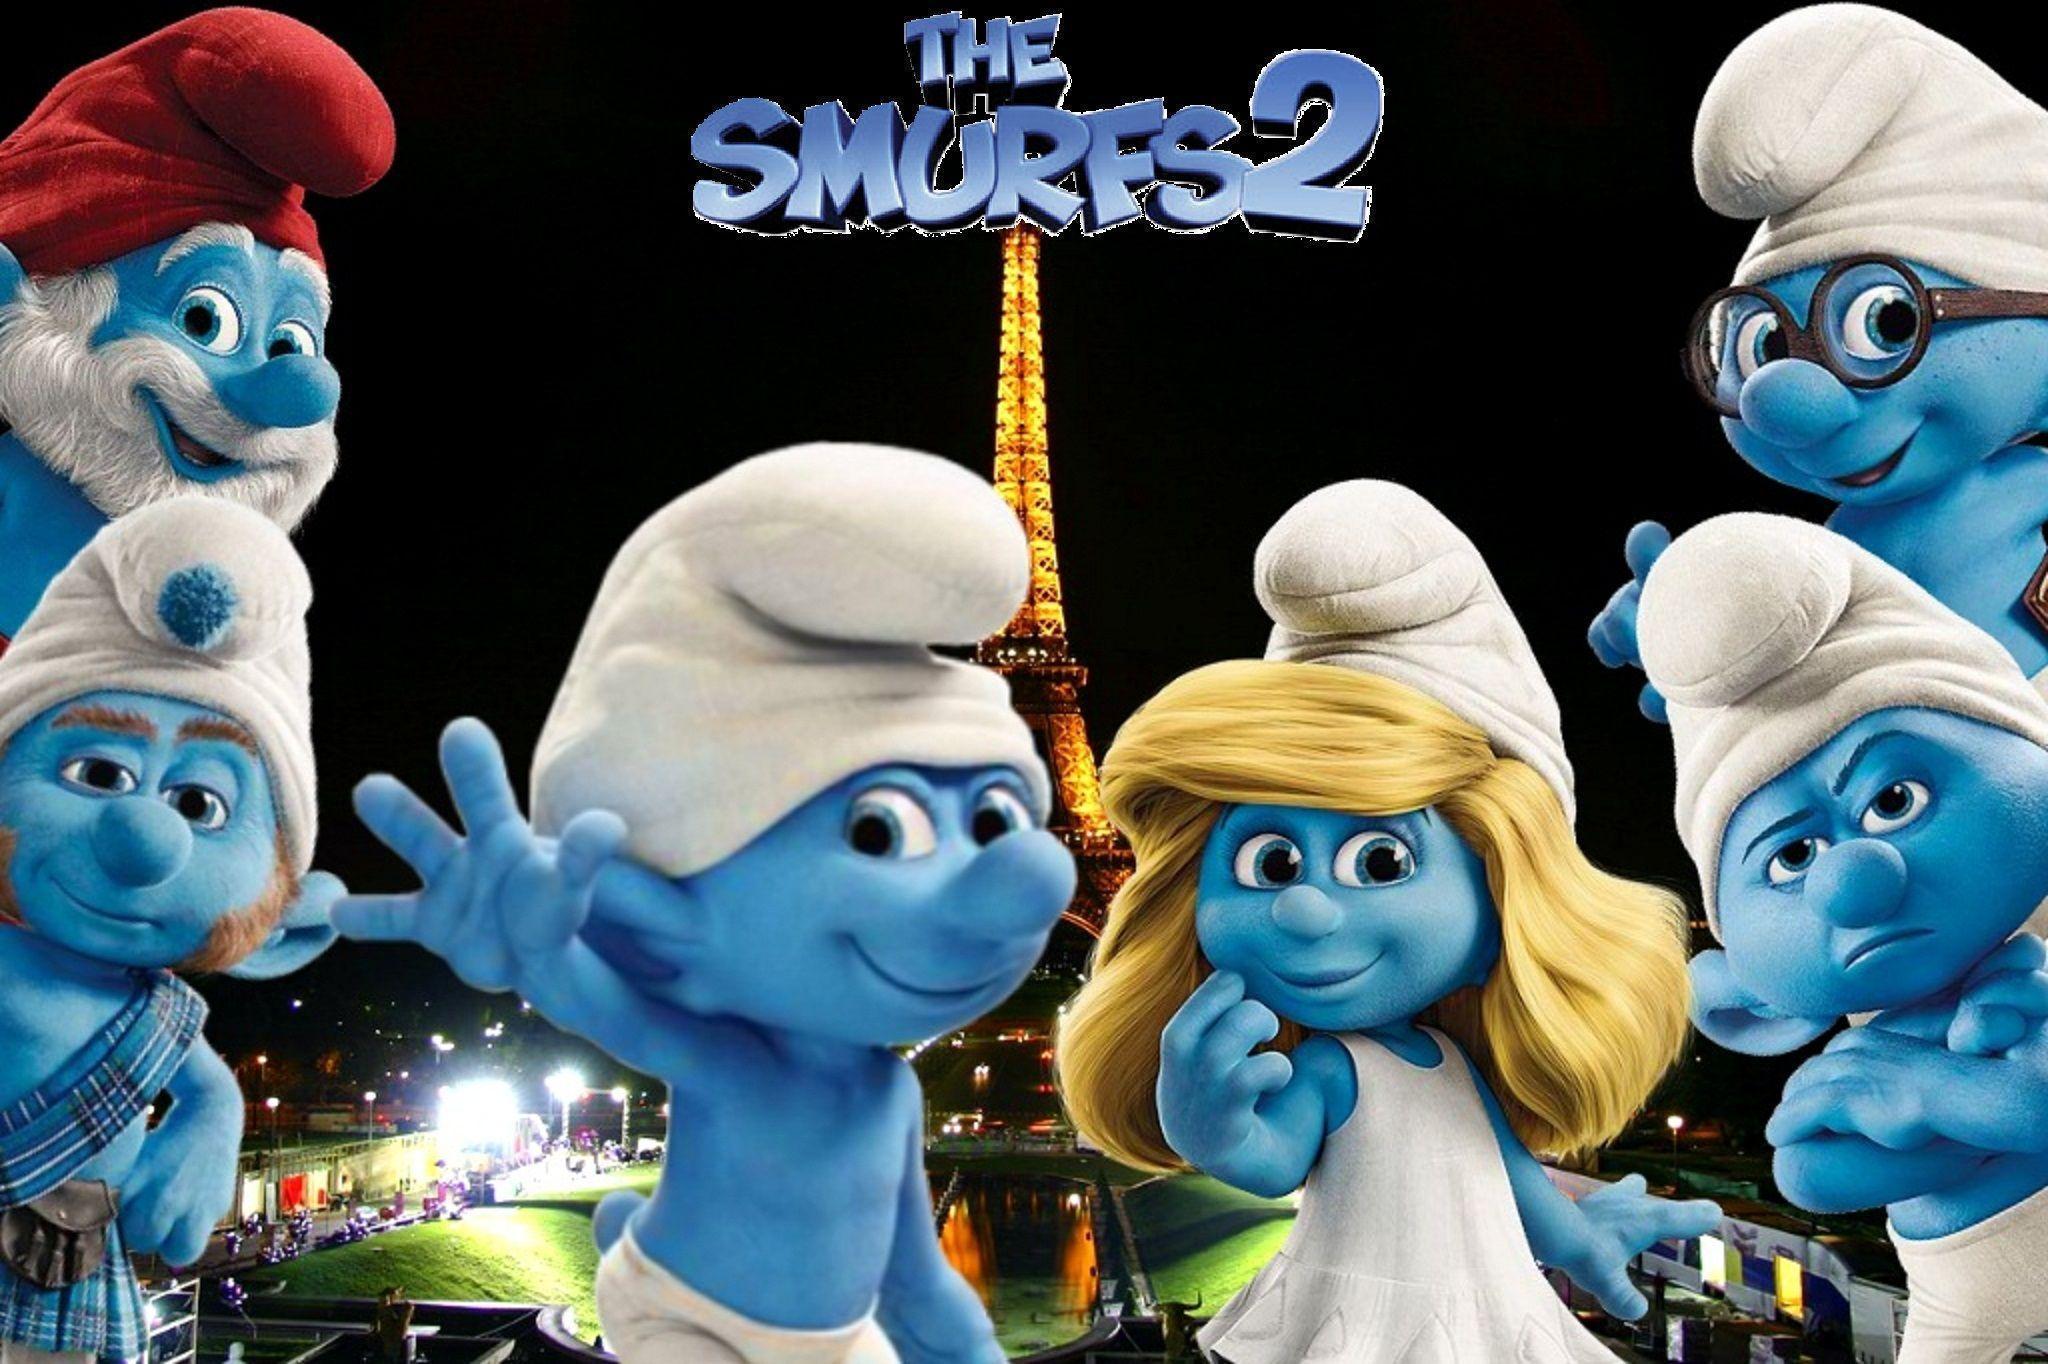 Extreme The Smurfs Wallpaper Free For iPad